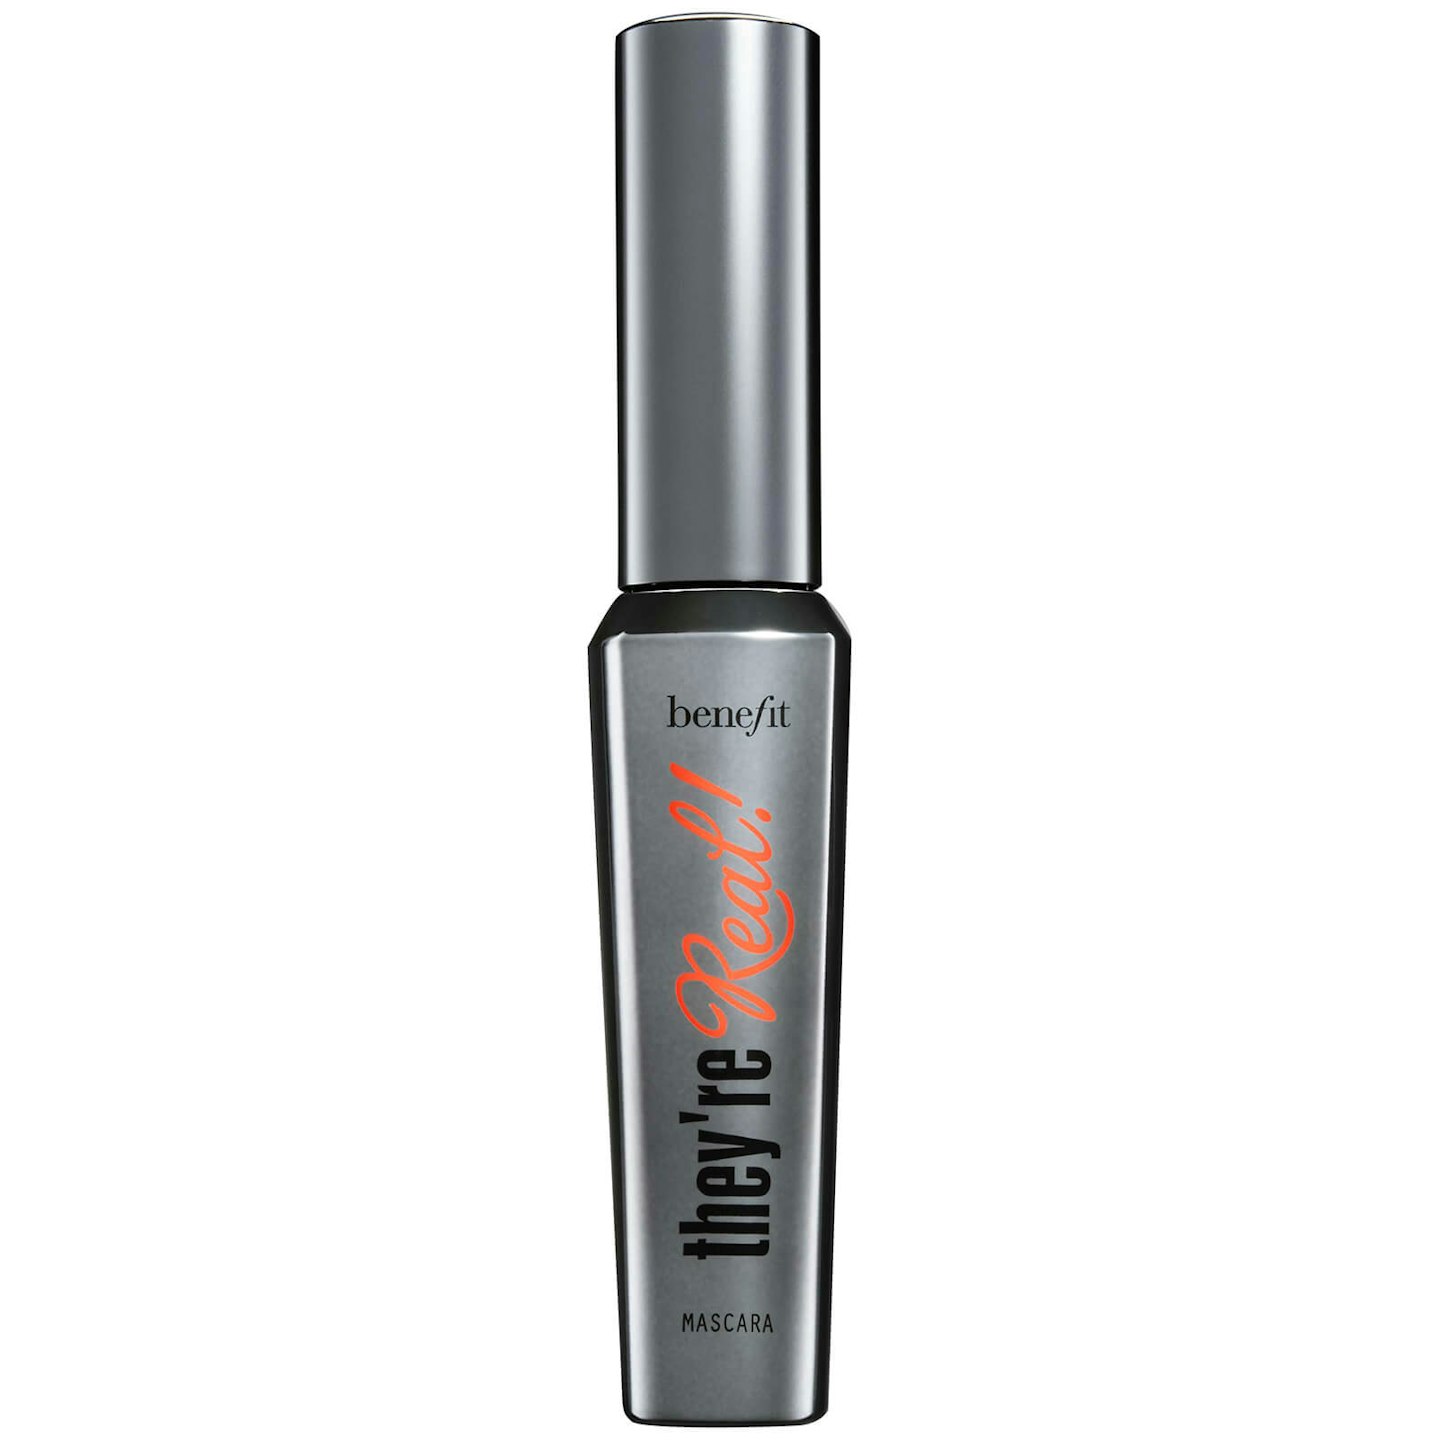 Benefit They're Real! Mascara, £22